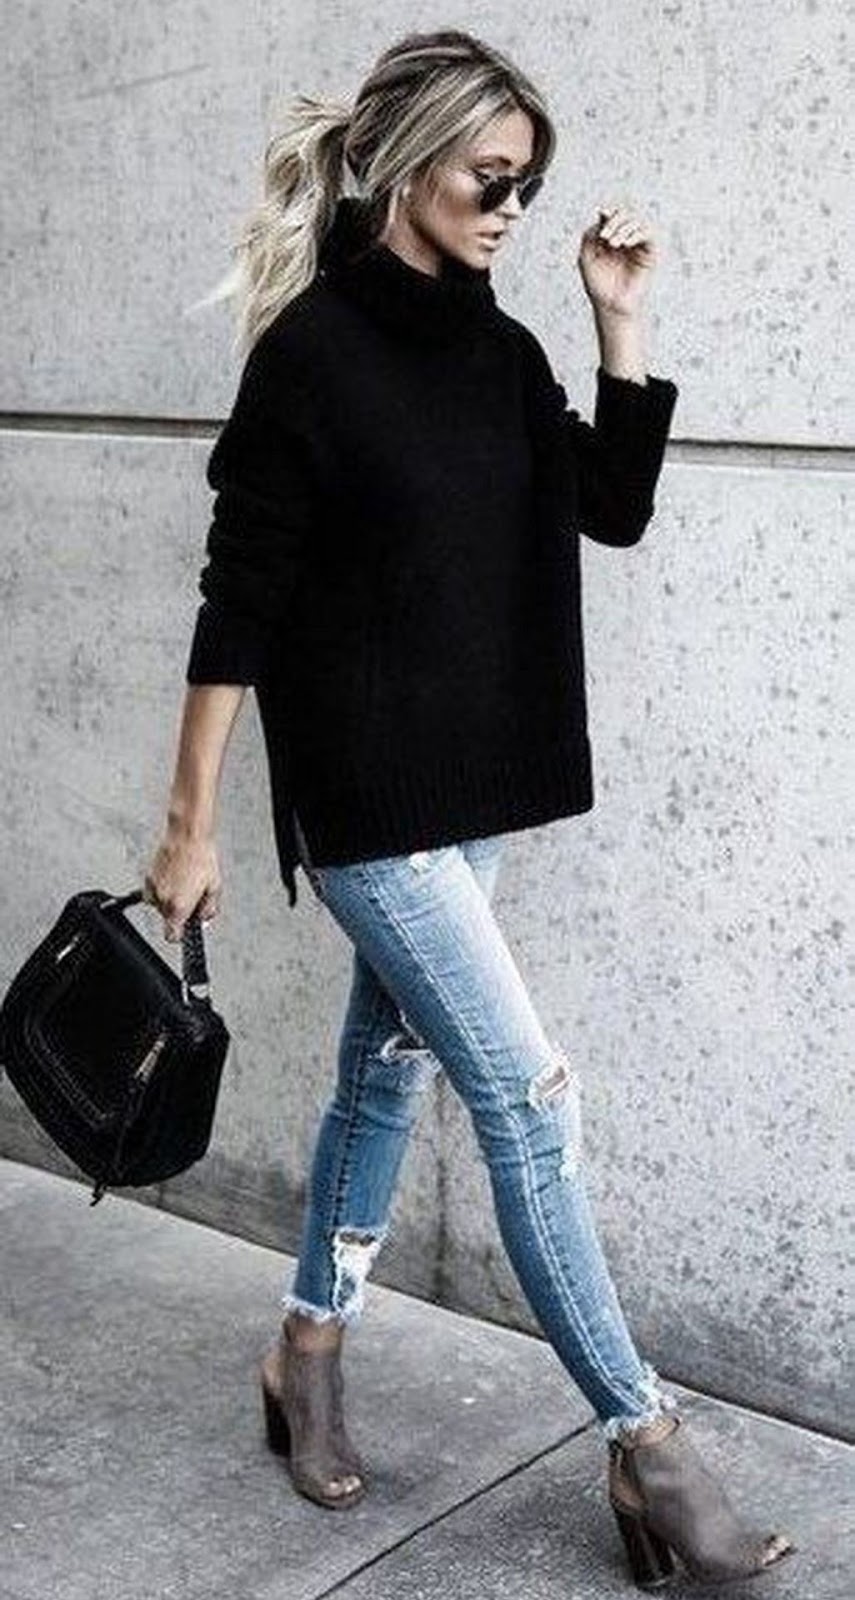 stylish look | black oversized sweater + ripped jeans + bag + heels